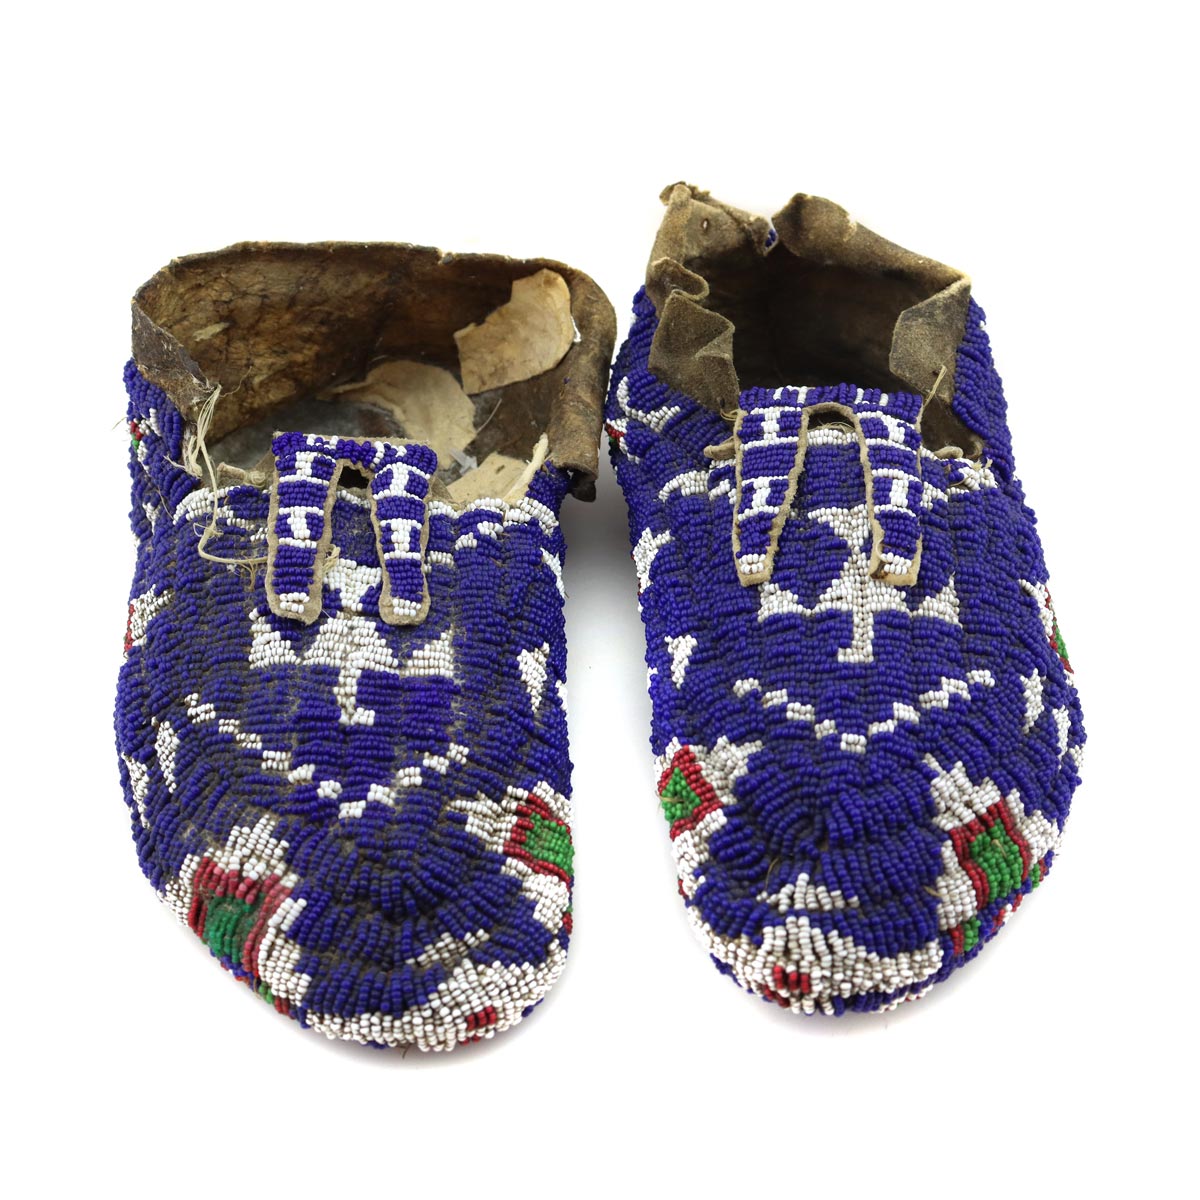 Sioux Beaded Leather Moccasins c. 1890-1900s, 3.5" x 9.5" x 4" (DW91963-0122-001) 1